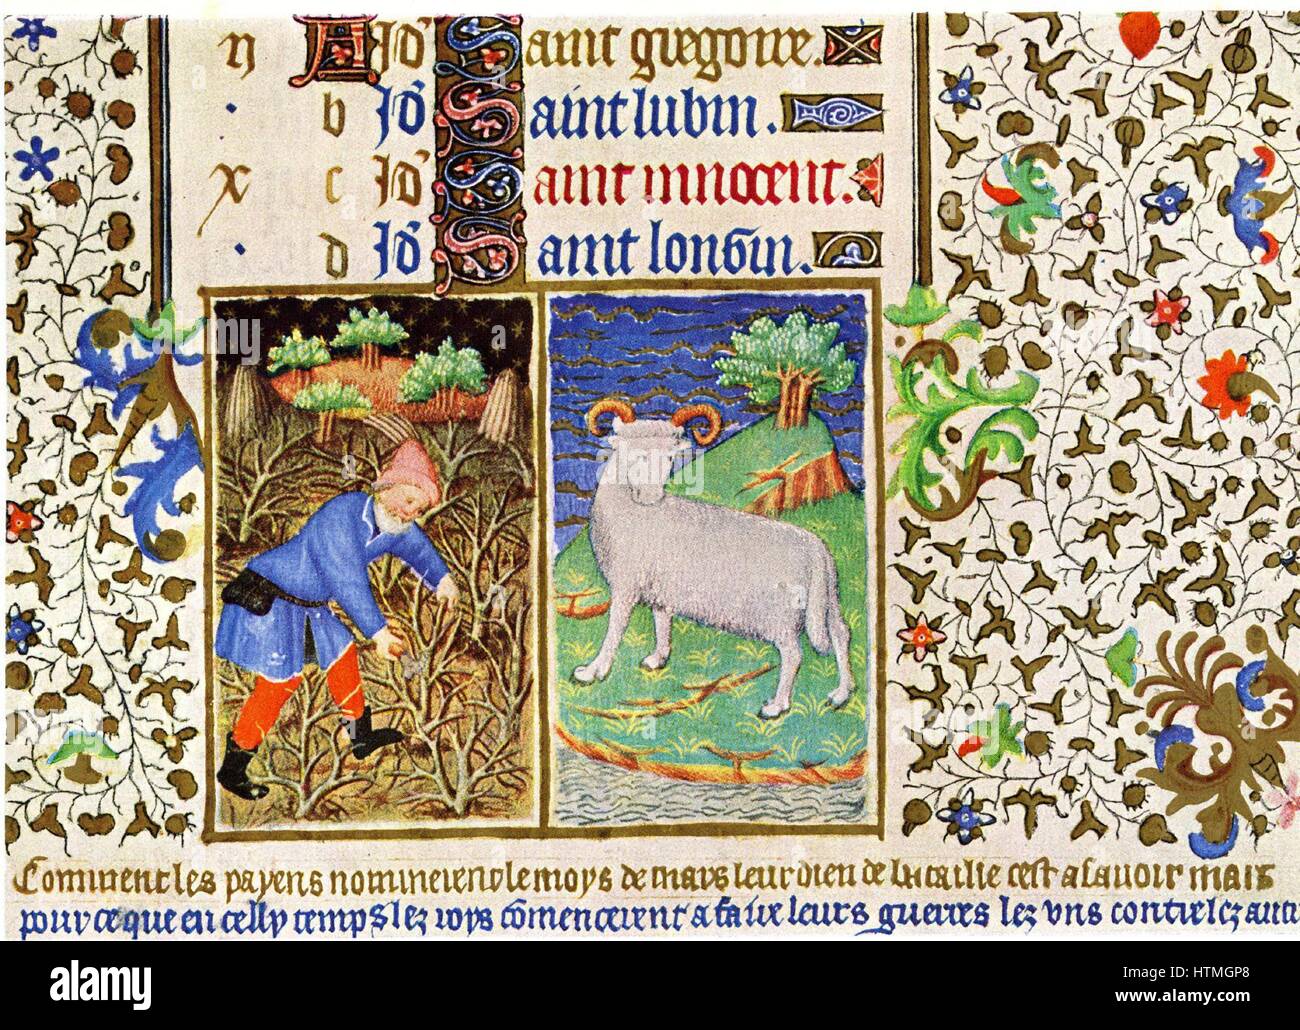 March. Astrological sign of Aries. Pruning. From the 'Bedford Hours', French 15th century illuminated manuscript. Stock Photo